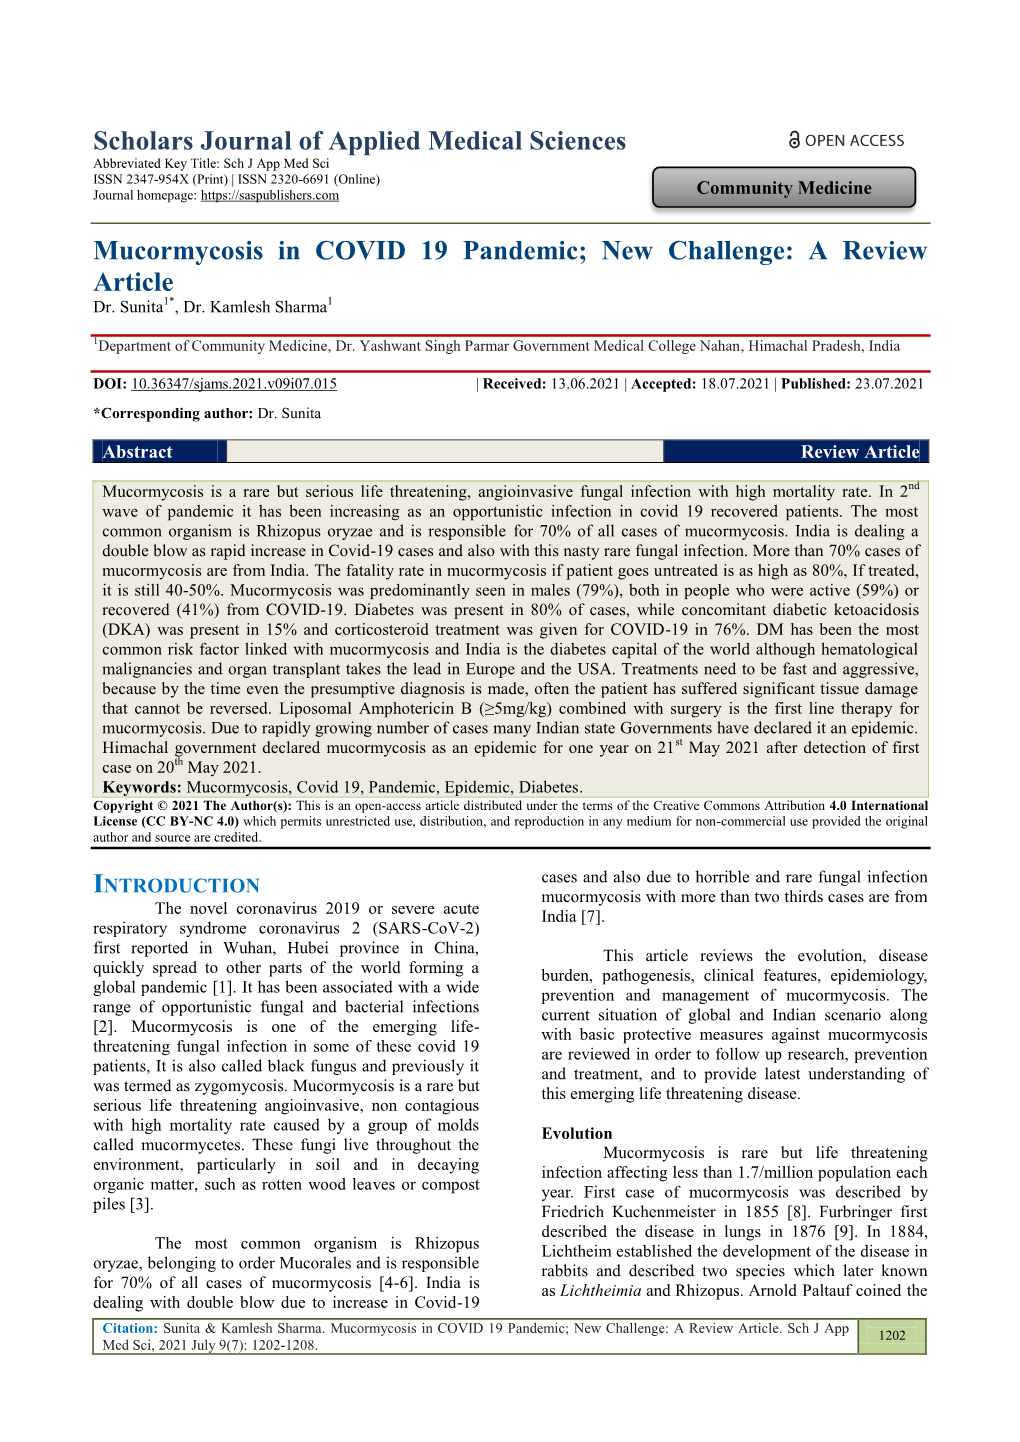 Mucormycosis in COVID 19 Pandemic; New Challenge: a Review Article Dr